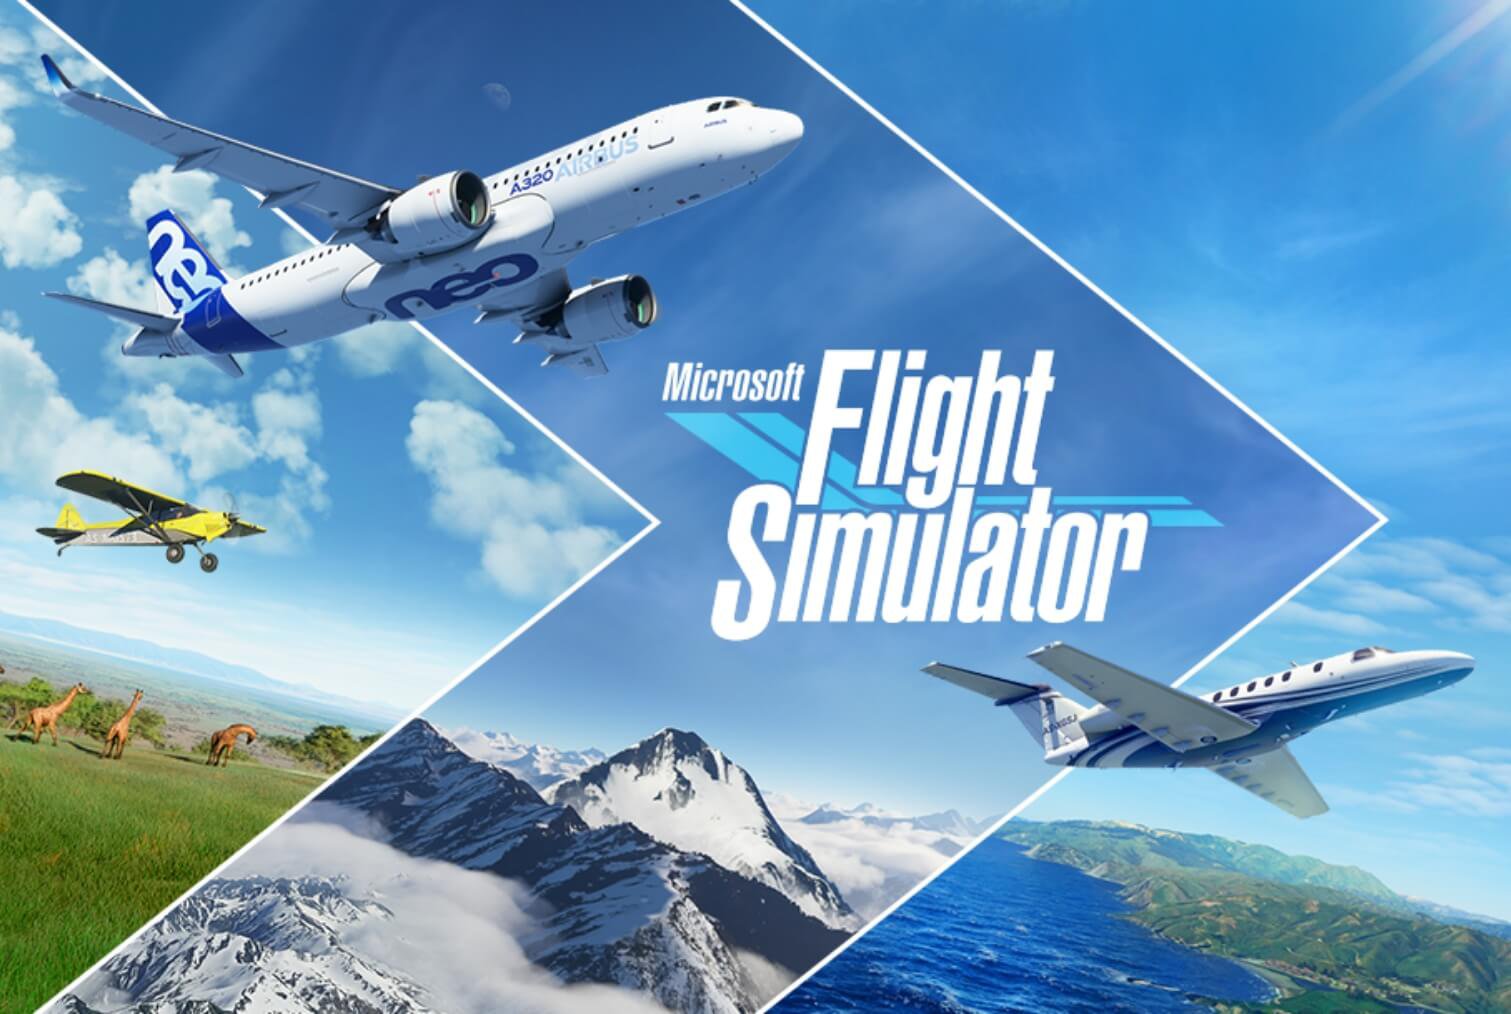 More information about "Microsoft Flight Simulator Launch Date!"